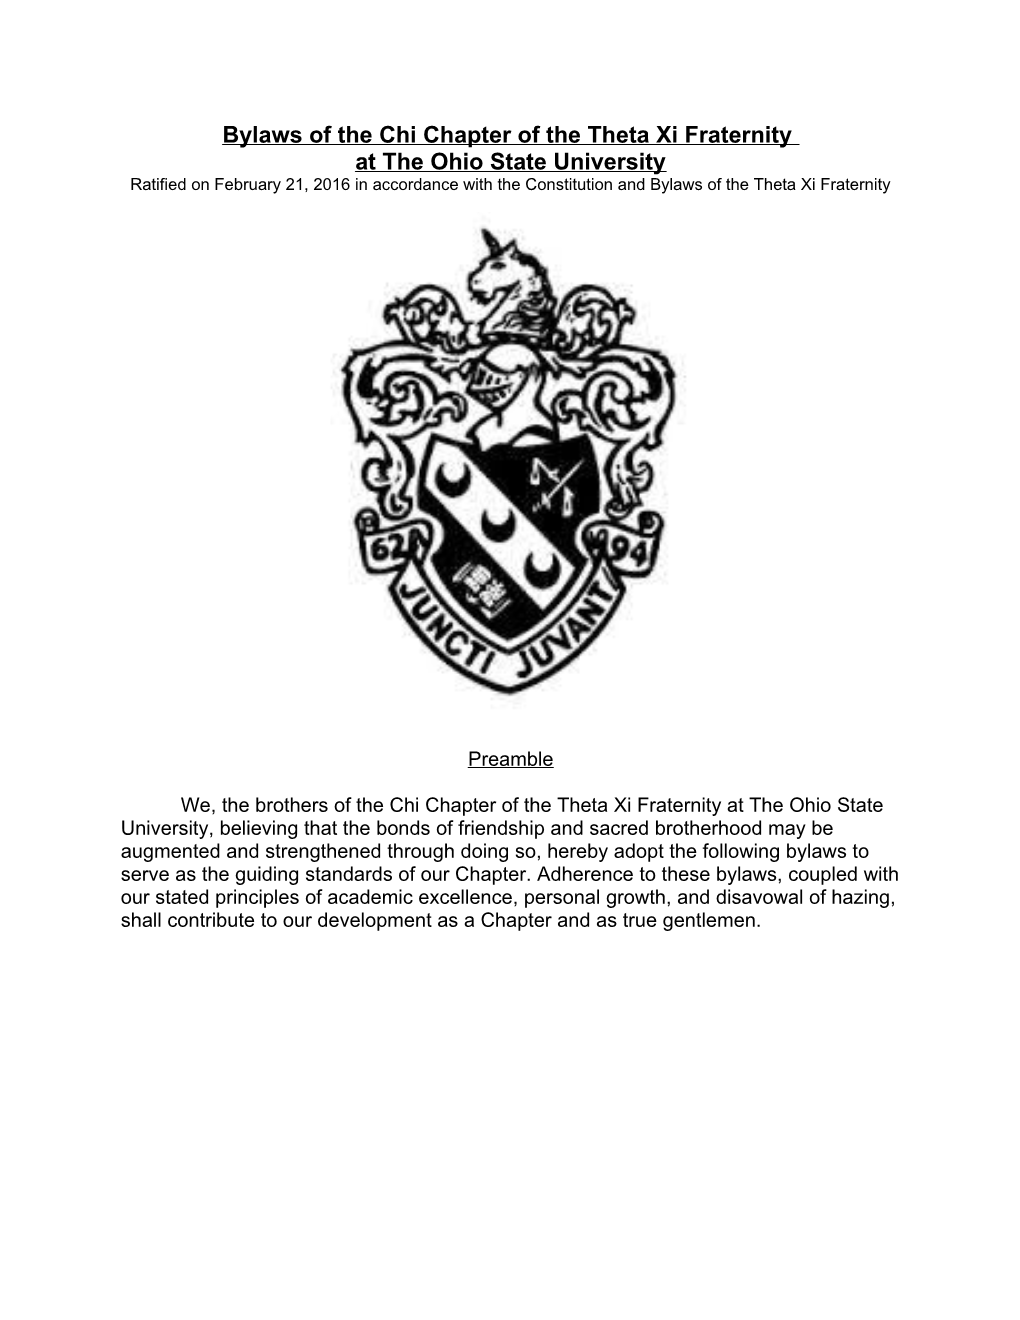 Bylaws of the Chi Chapter of the Theta Xi Fraternity